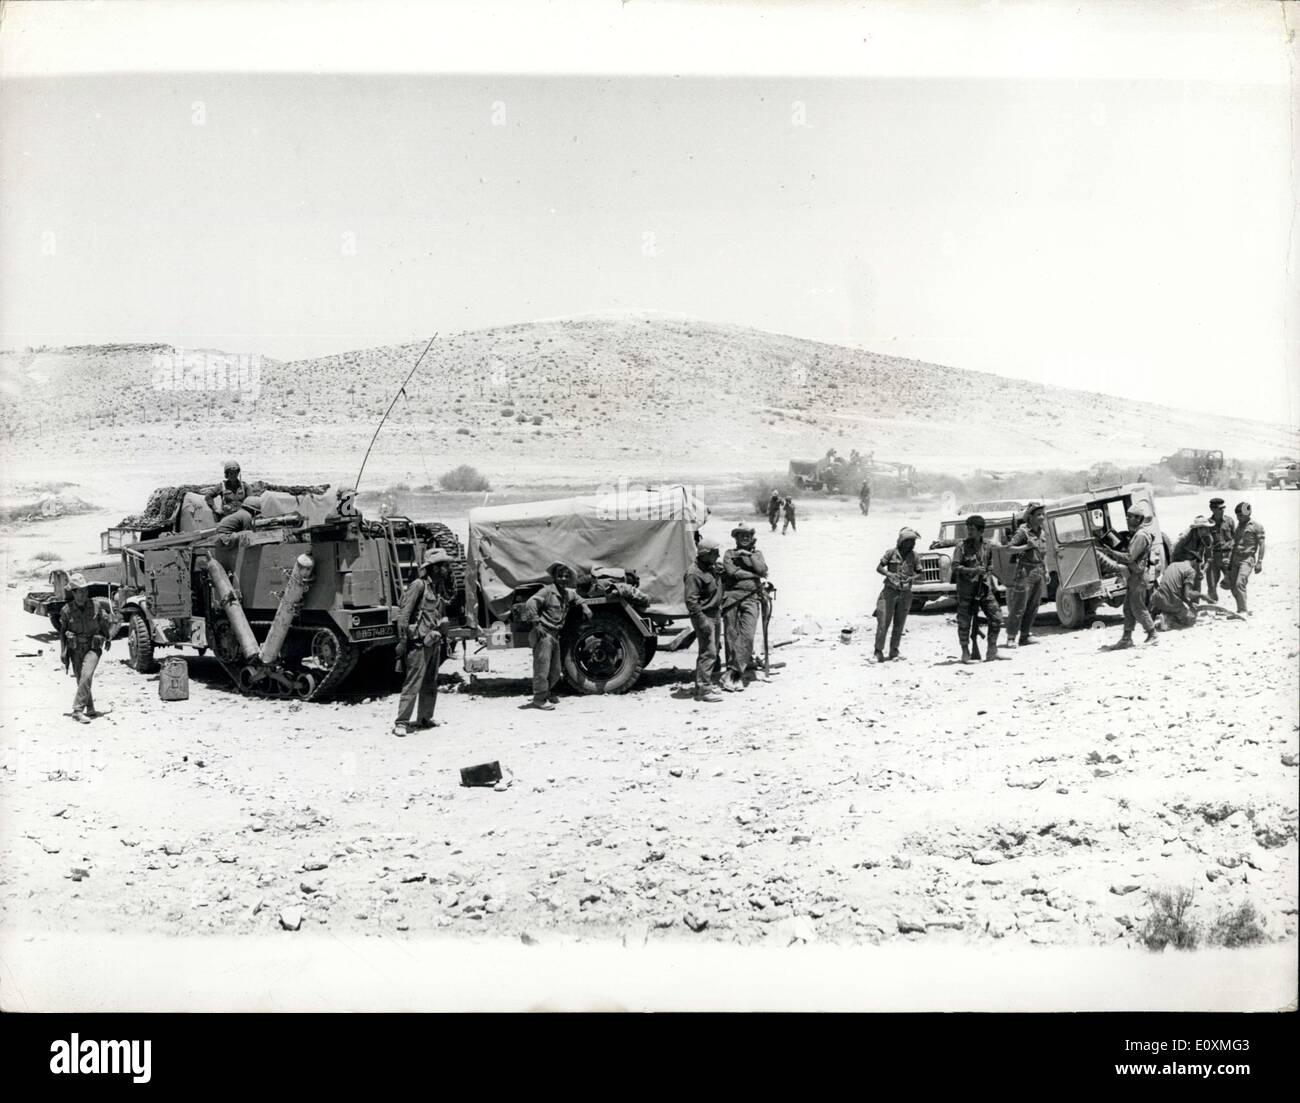 May 31, 1967 - The Tension In The Middle East Scenes In The Negev Desert. Photo shows Israeli soldiers take it easy as they stand beside their army trucks in an encampment in the Negev Desert. Stock Photo